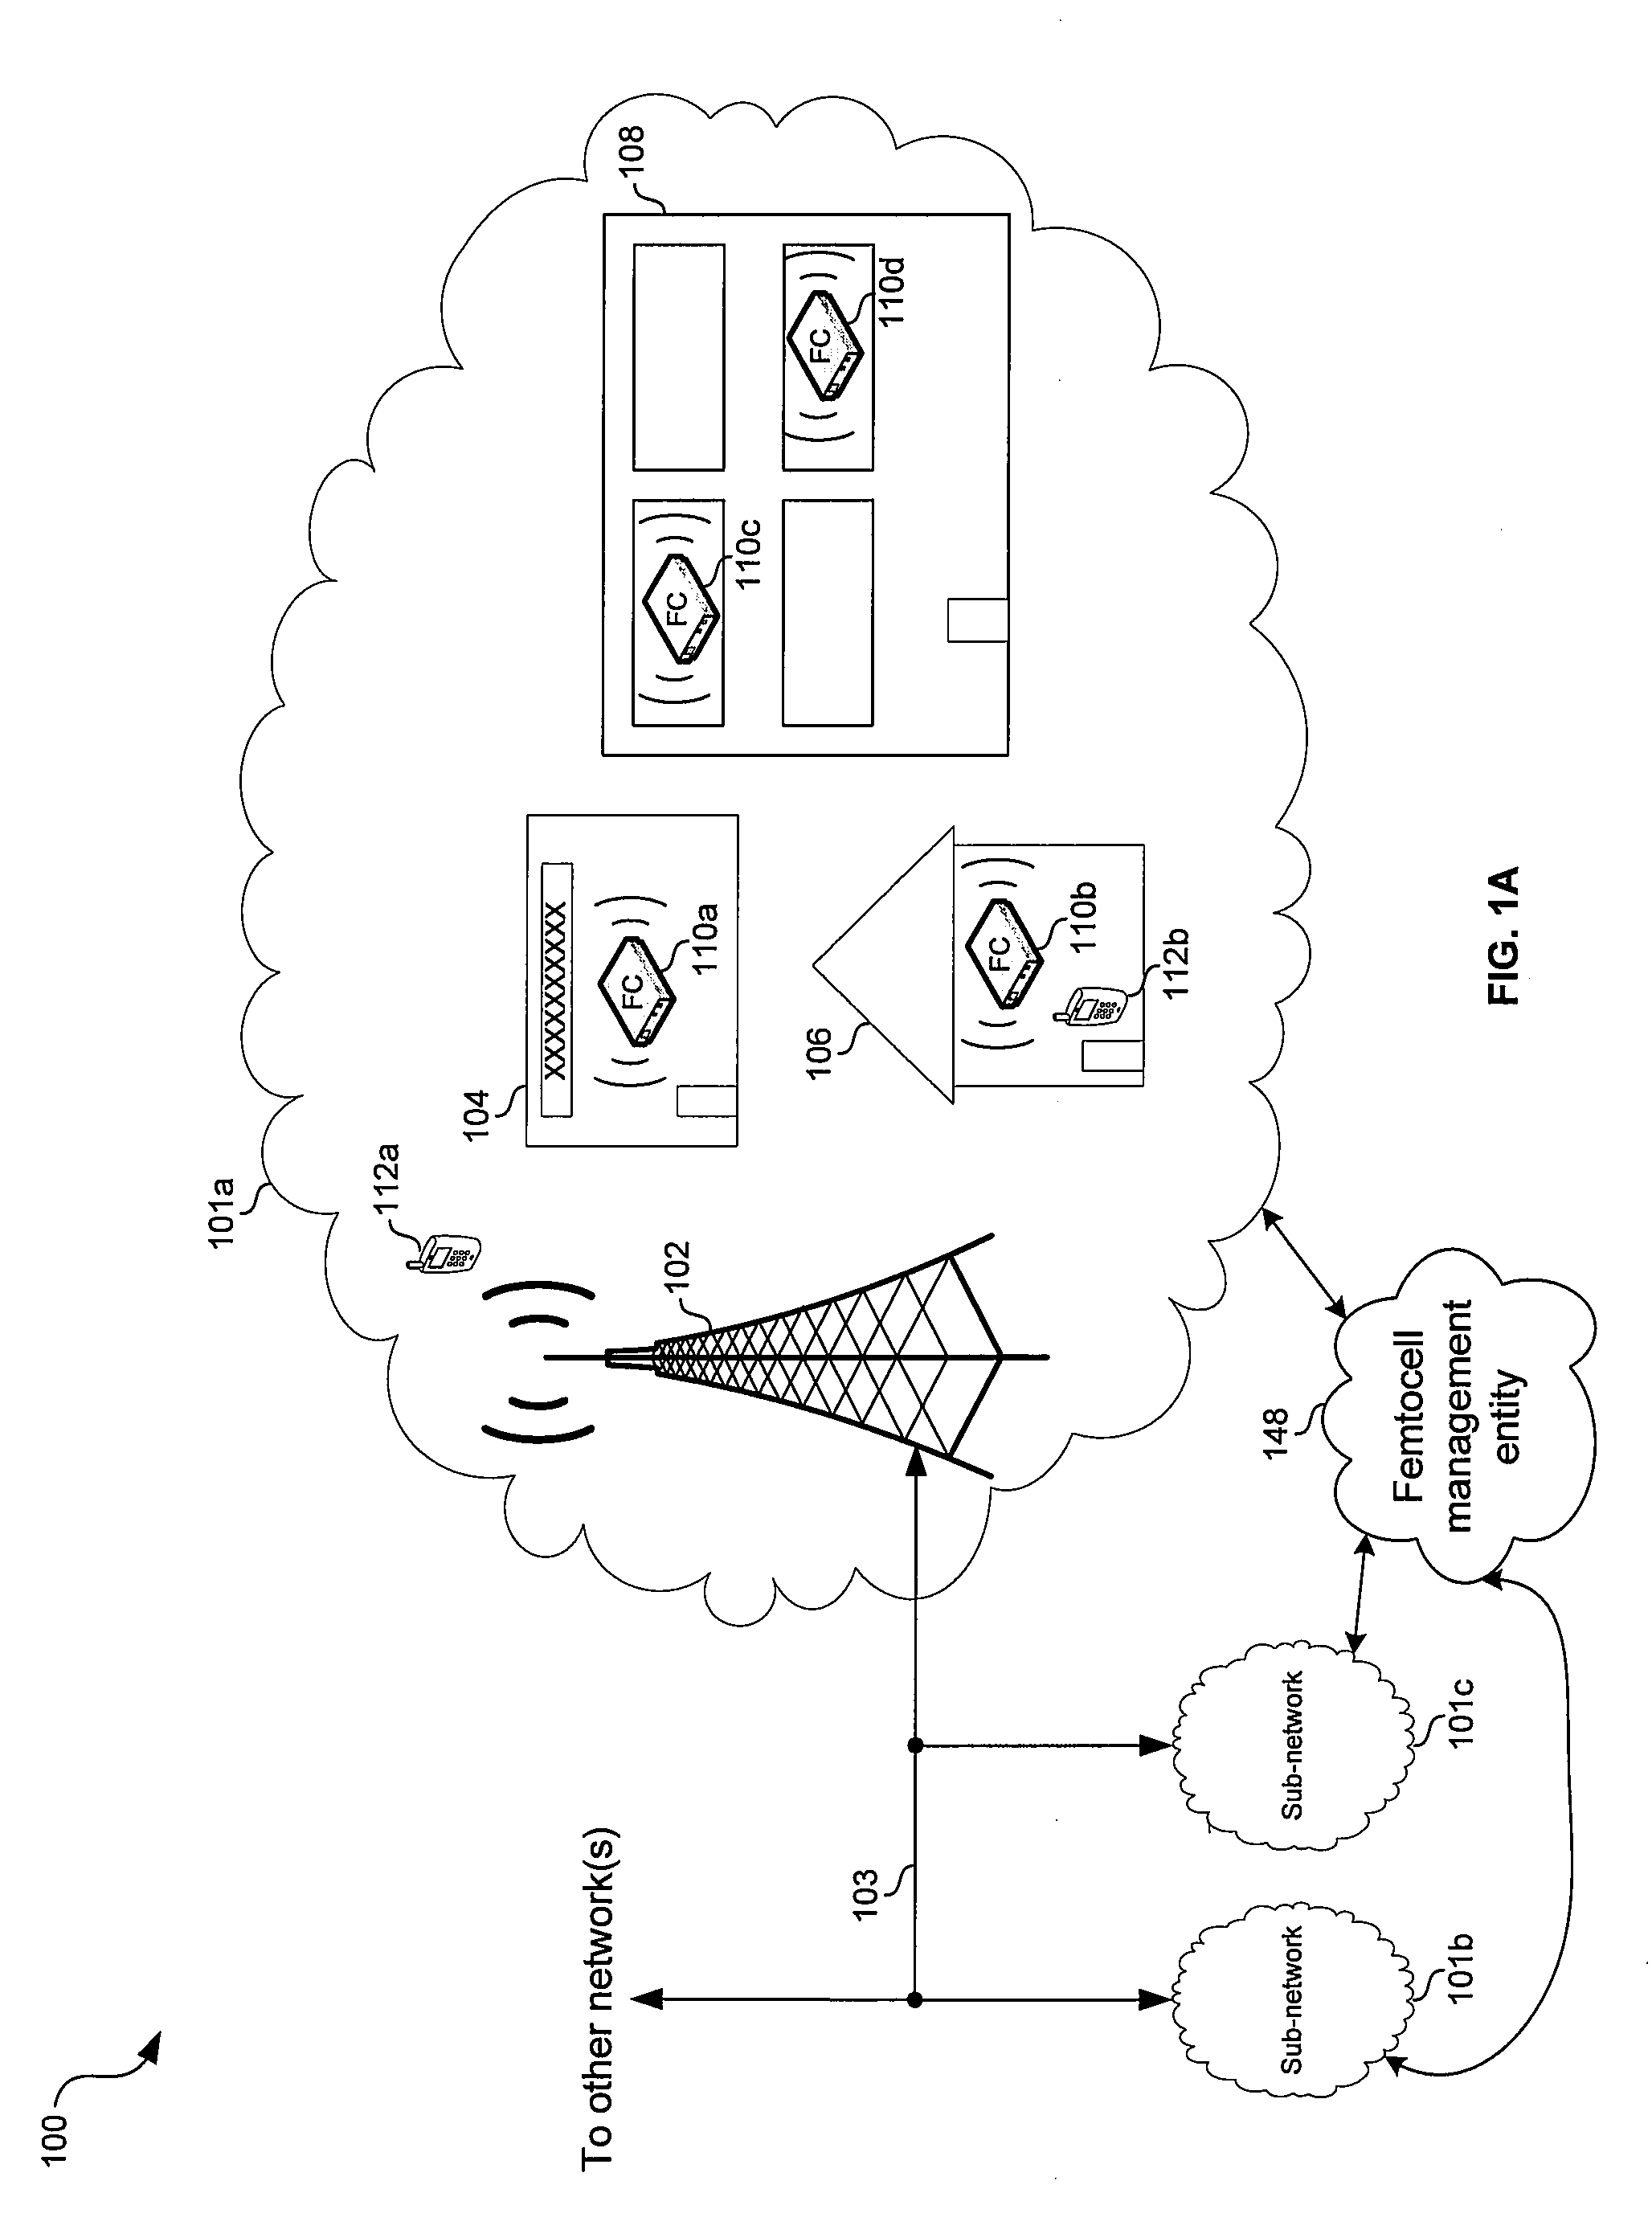 Method and System for Determining a Location of a Device Using Femtocell Information